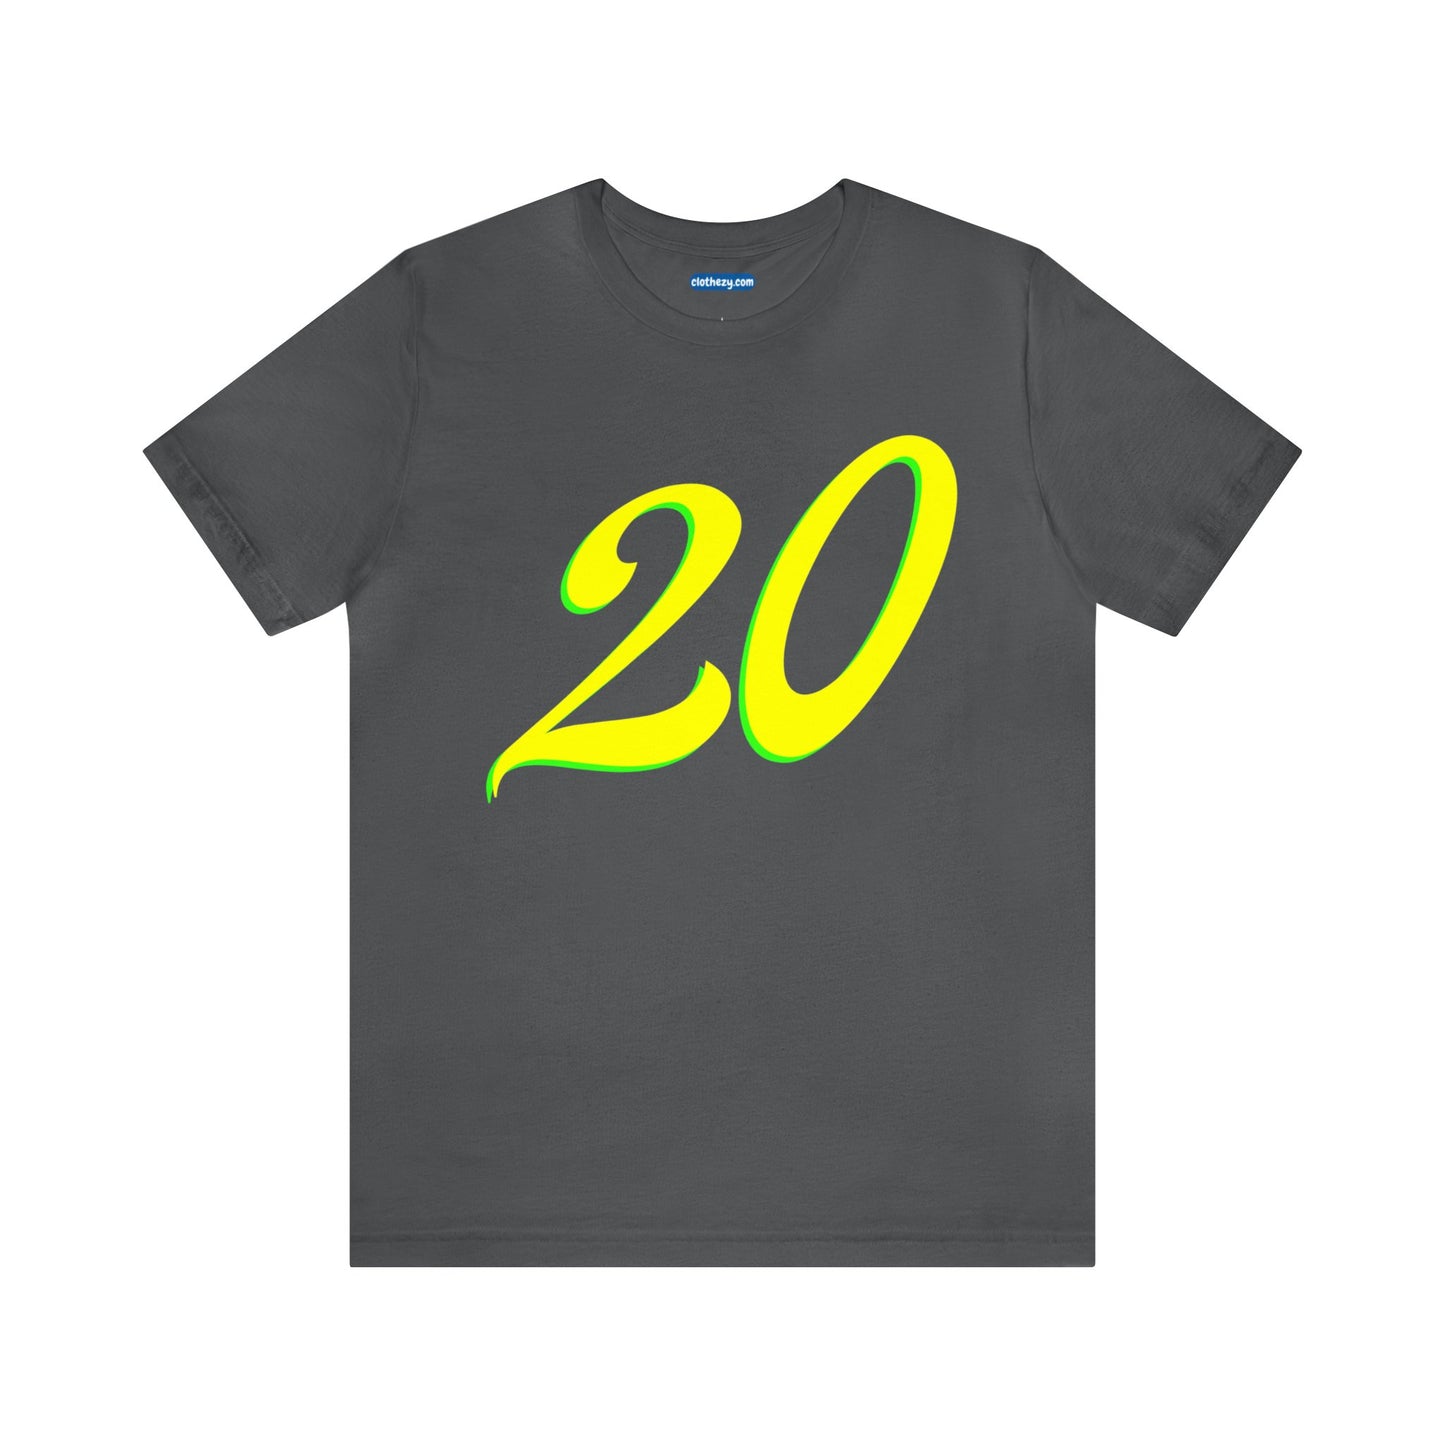 Number 20 Design - Soft Cotton Tee for birthdays and celebrations, Gift for friends and family, Multiple Options by clothezy.com in Black Size Small - Buy Now